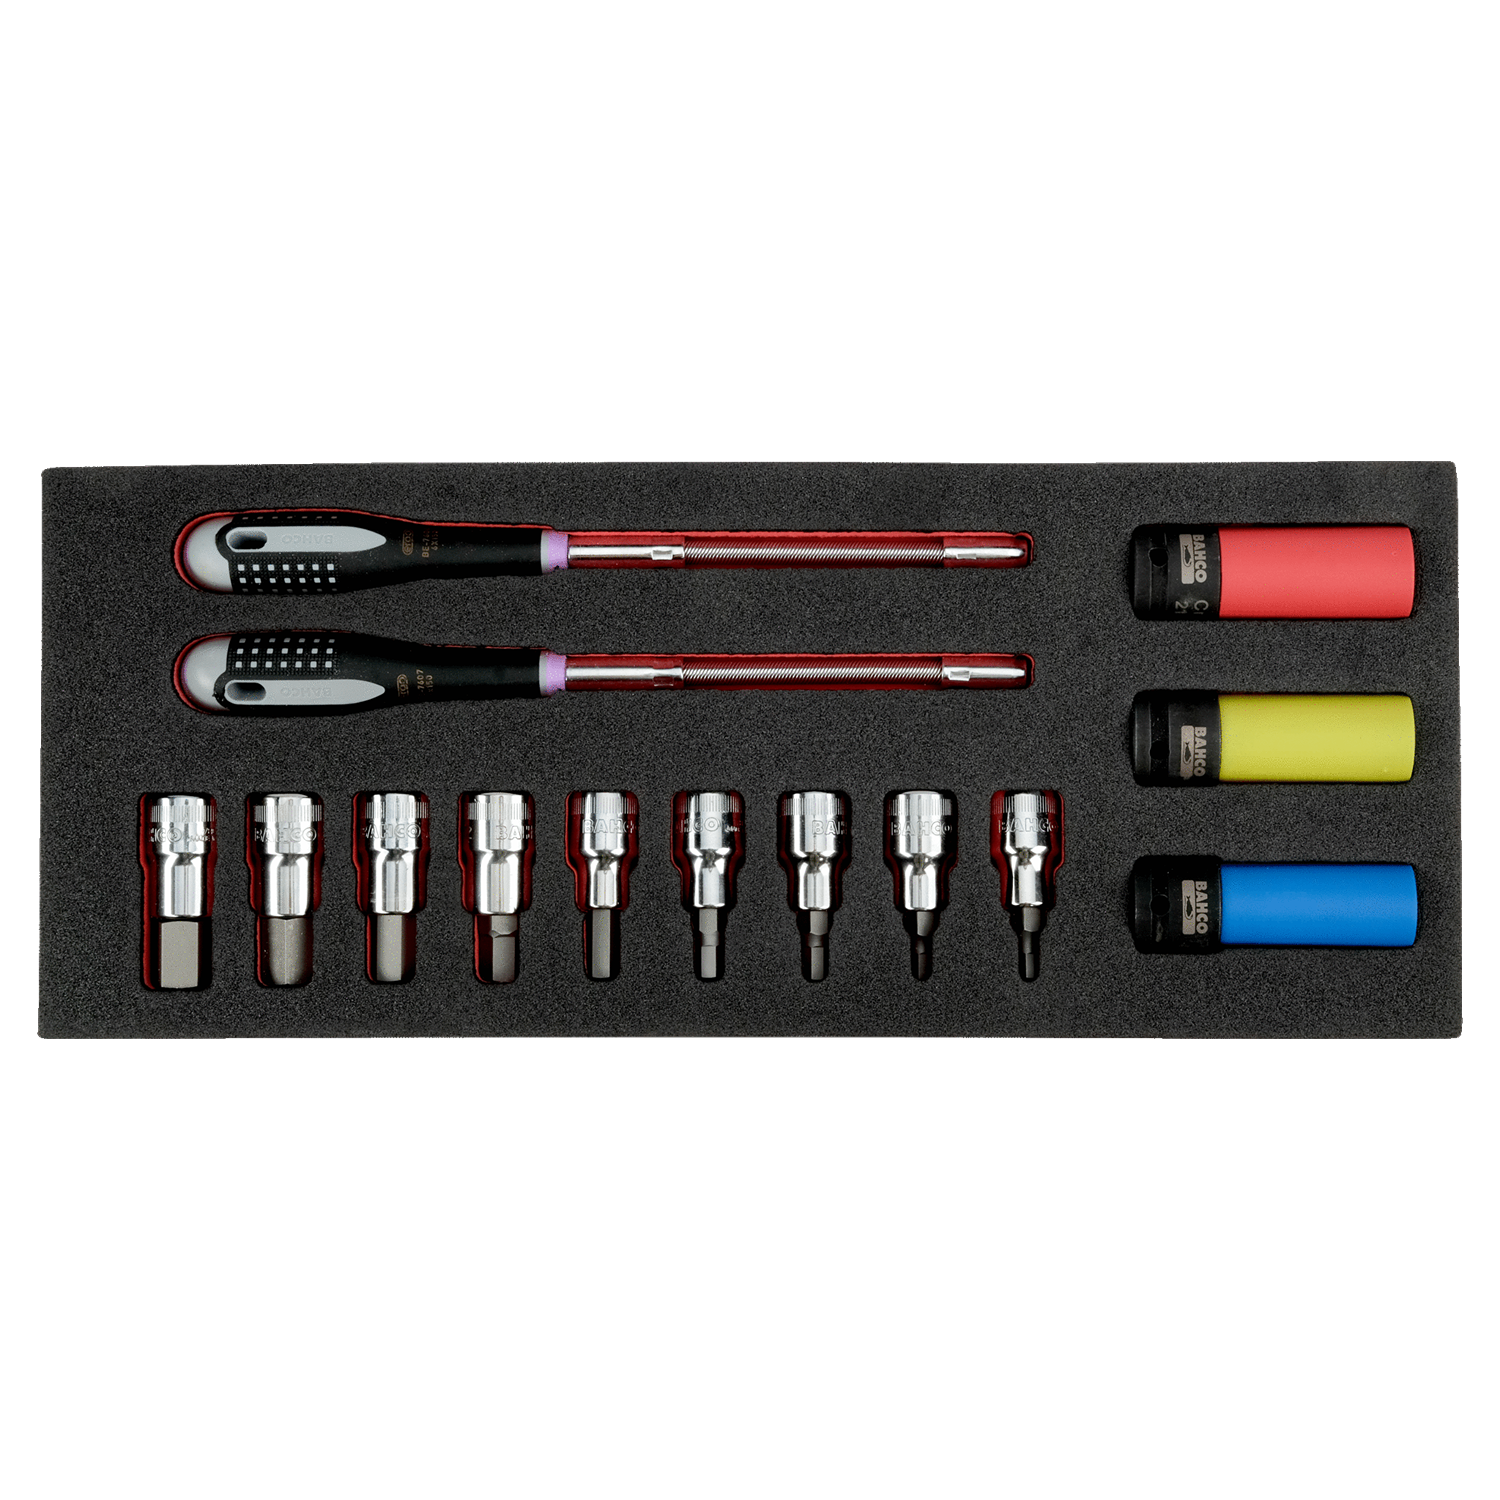 BAHCO FF1E2210 Fit&Go 1/2" Screwdriver Bit and Impact Socket Set - Premium 1/2" Screwdriver Bit and Impact Socket Set from BAHCO - Shop now at Yew Aik.